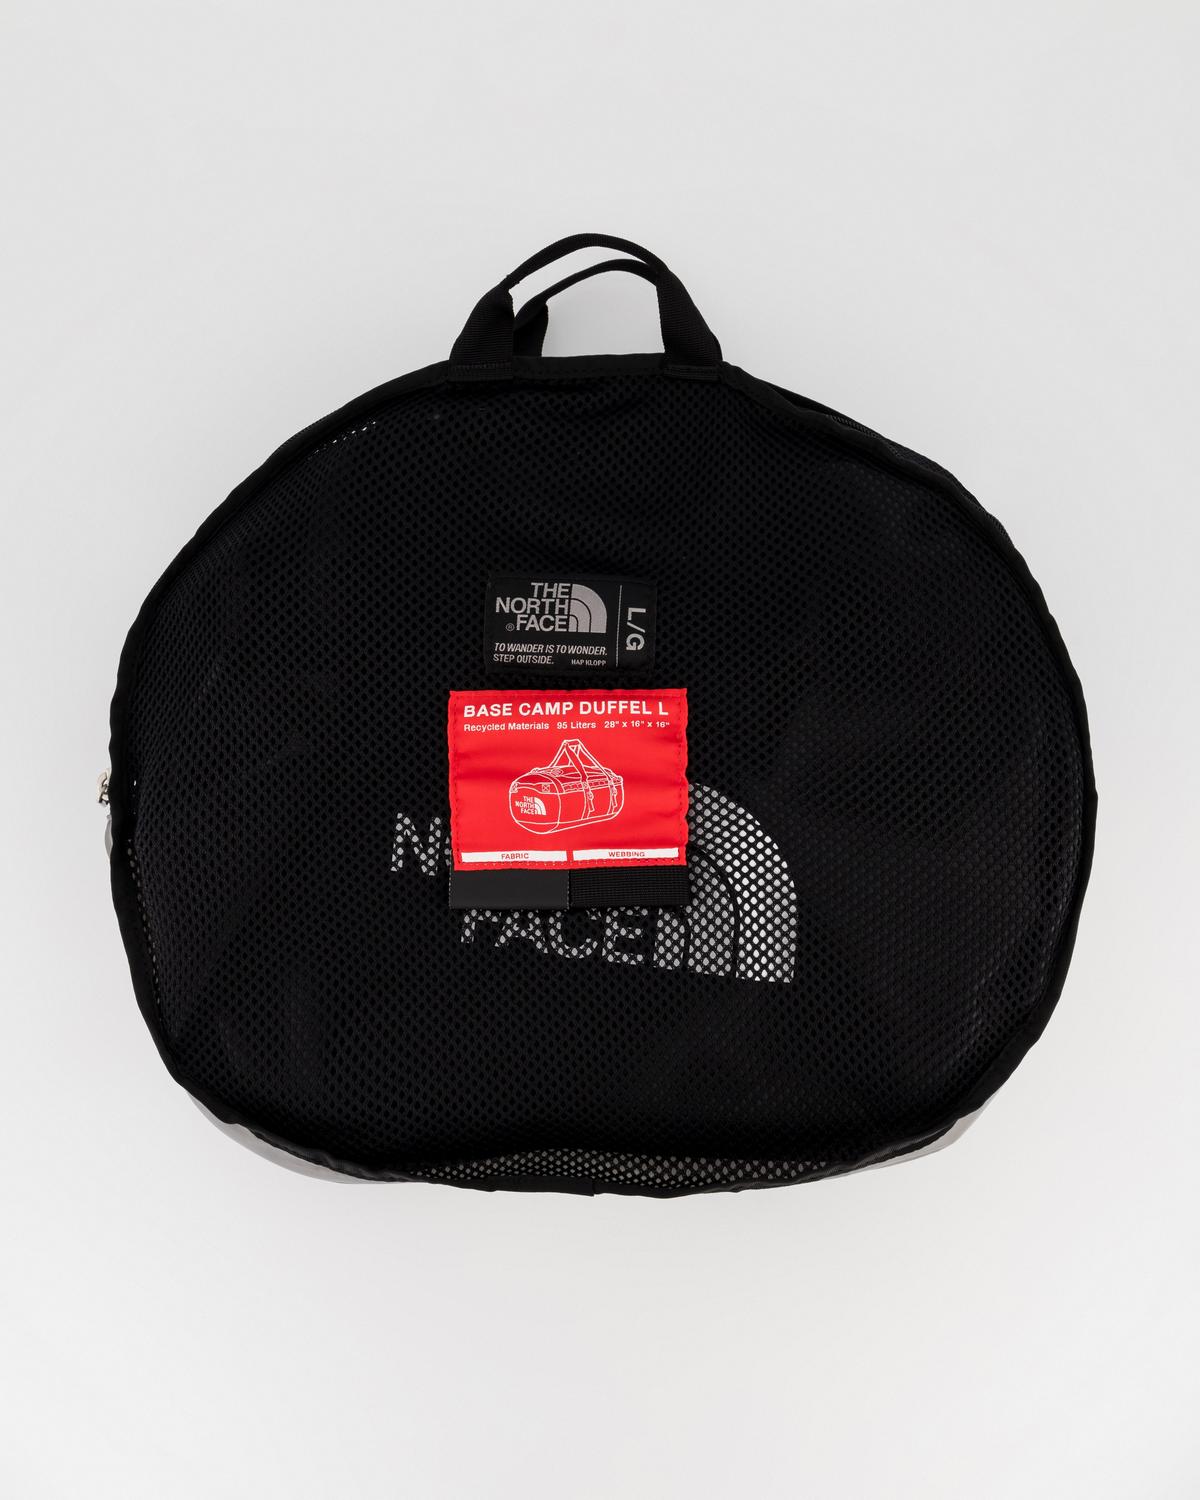 The North Face Large Base Camp Duffel Bag -  Black